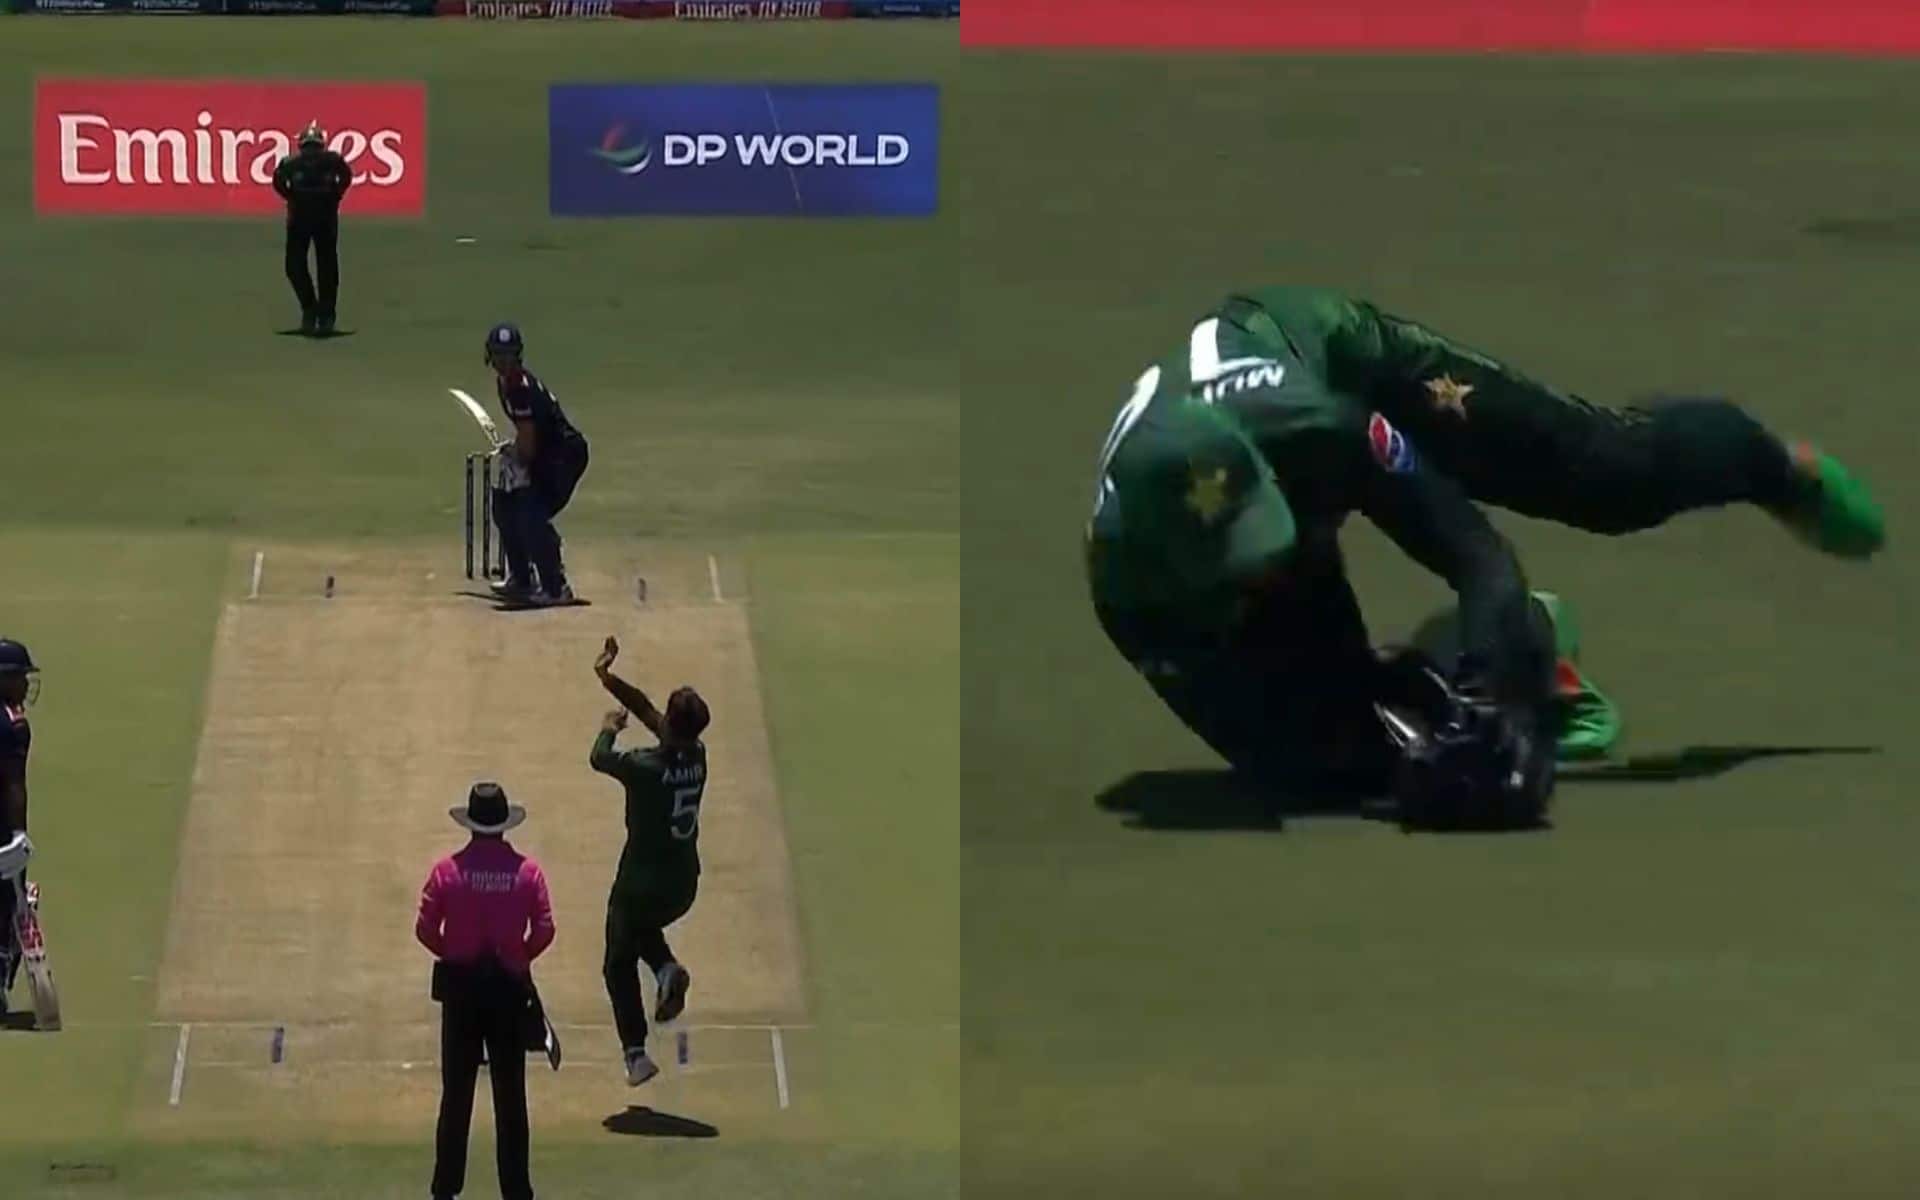 Rizwan takes an excellent catch to help Amir take a wicket (X.com)